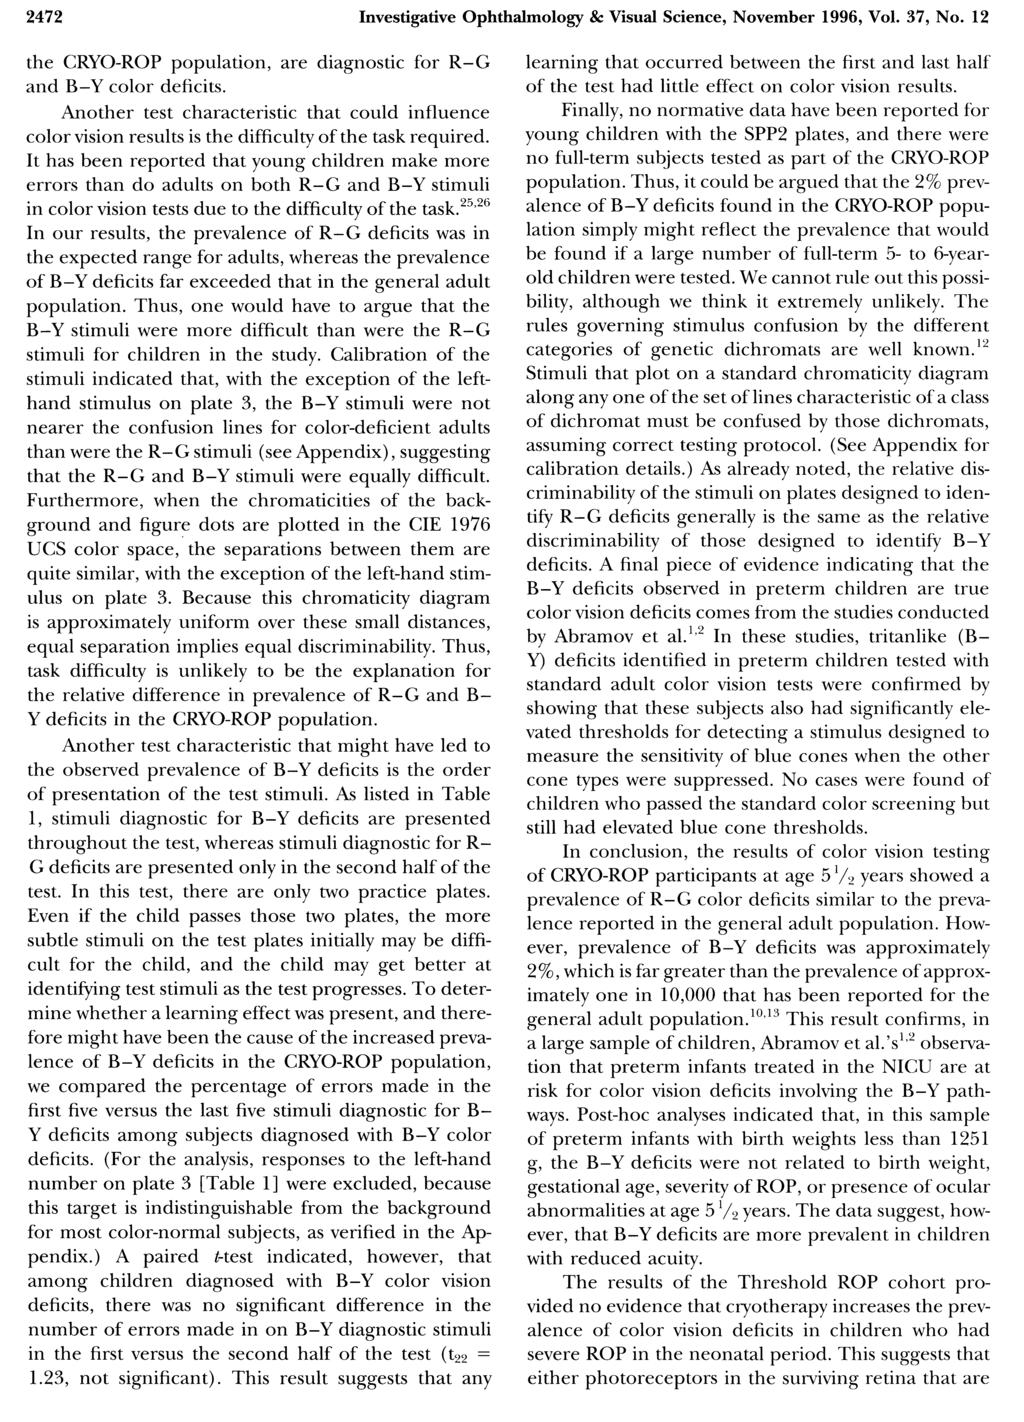 2472 Investigative Ophthalmology & Visual Science, November 1996, Vol. 37, No. 12 the CRYO-ROP population, are diagnostic for R-G and B-Y color deficits.